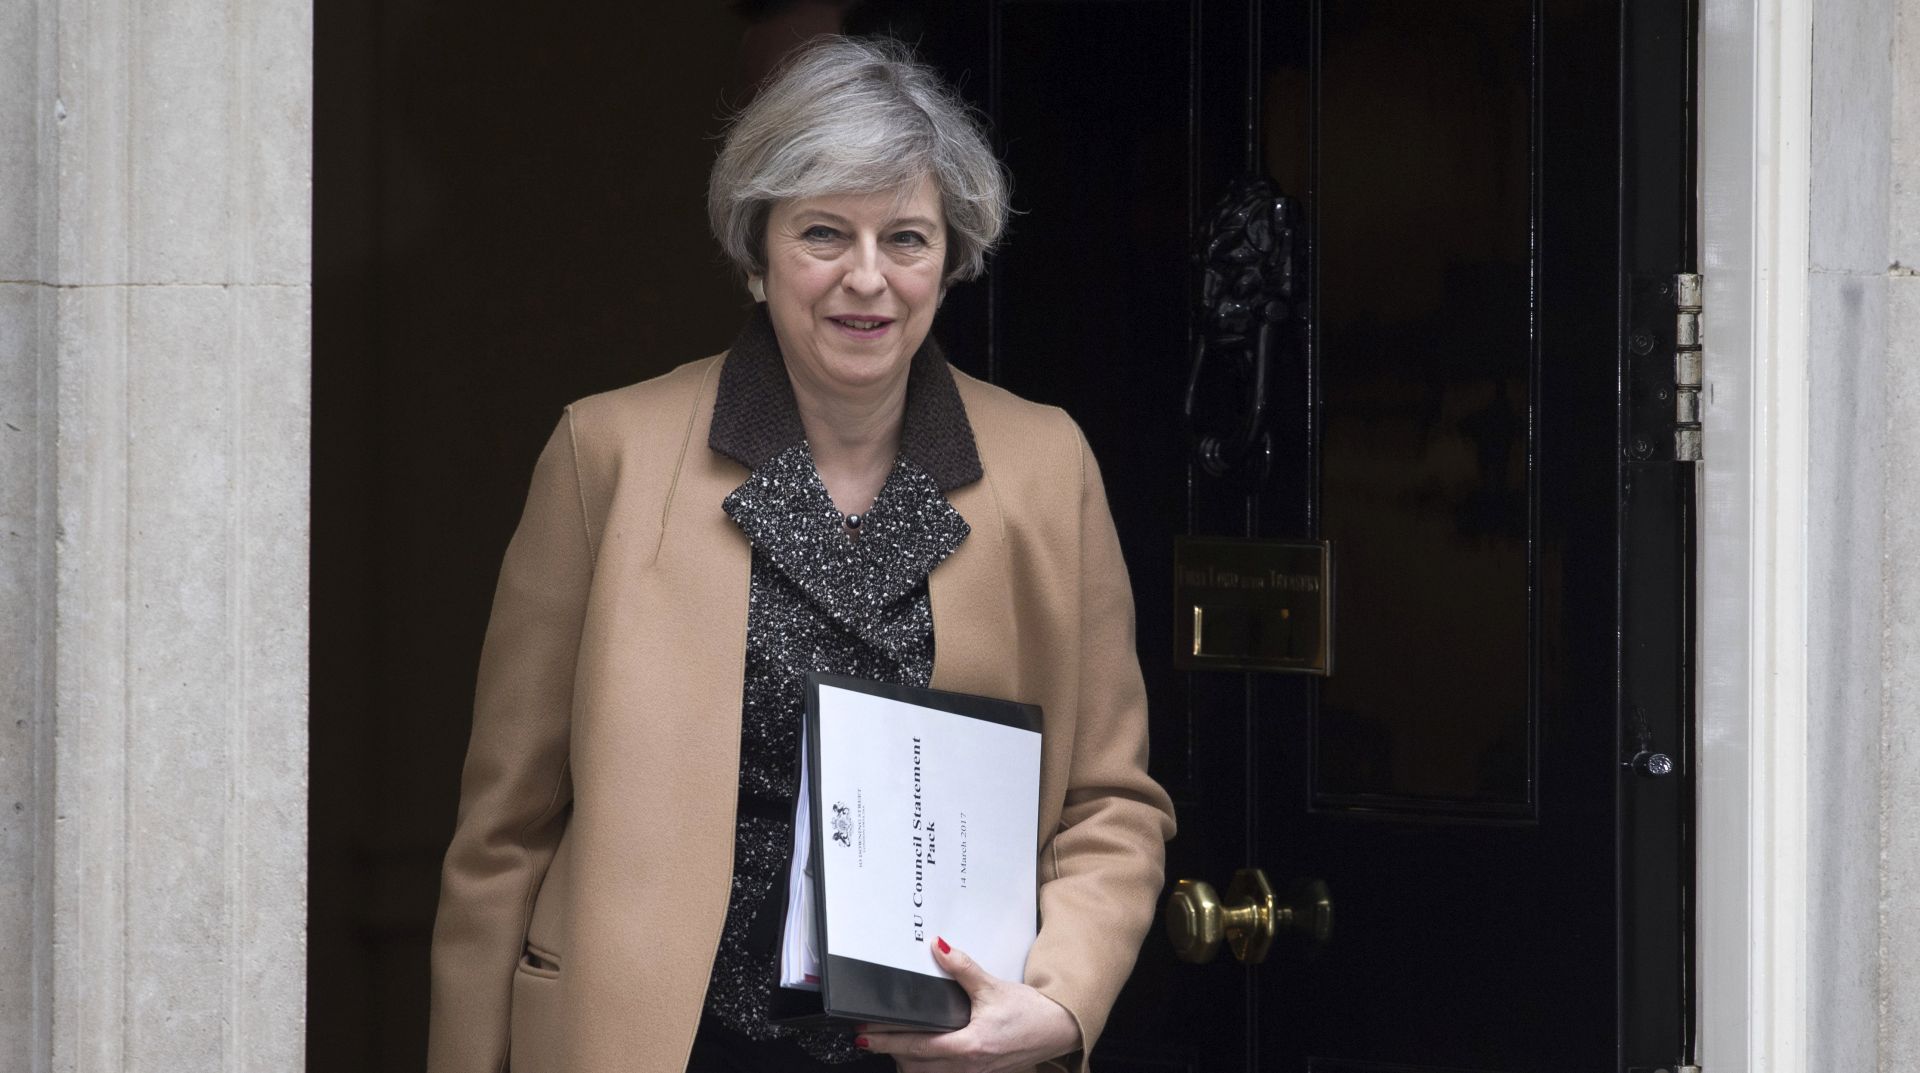 epa05847321 British Prime Minister Theresa May leaves 10 Downing Street to deliver a statement to the House of Commons in London, Britain, 14 March 2017. The Governments bill triggering Brexit passed the The House of Lords on 13 March 2017 allowing British Prime Minister Theresa May to start the process of the United Kingdom leaving the European Union.  EPA/WILL OLIVER